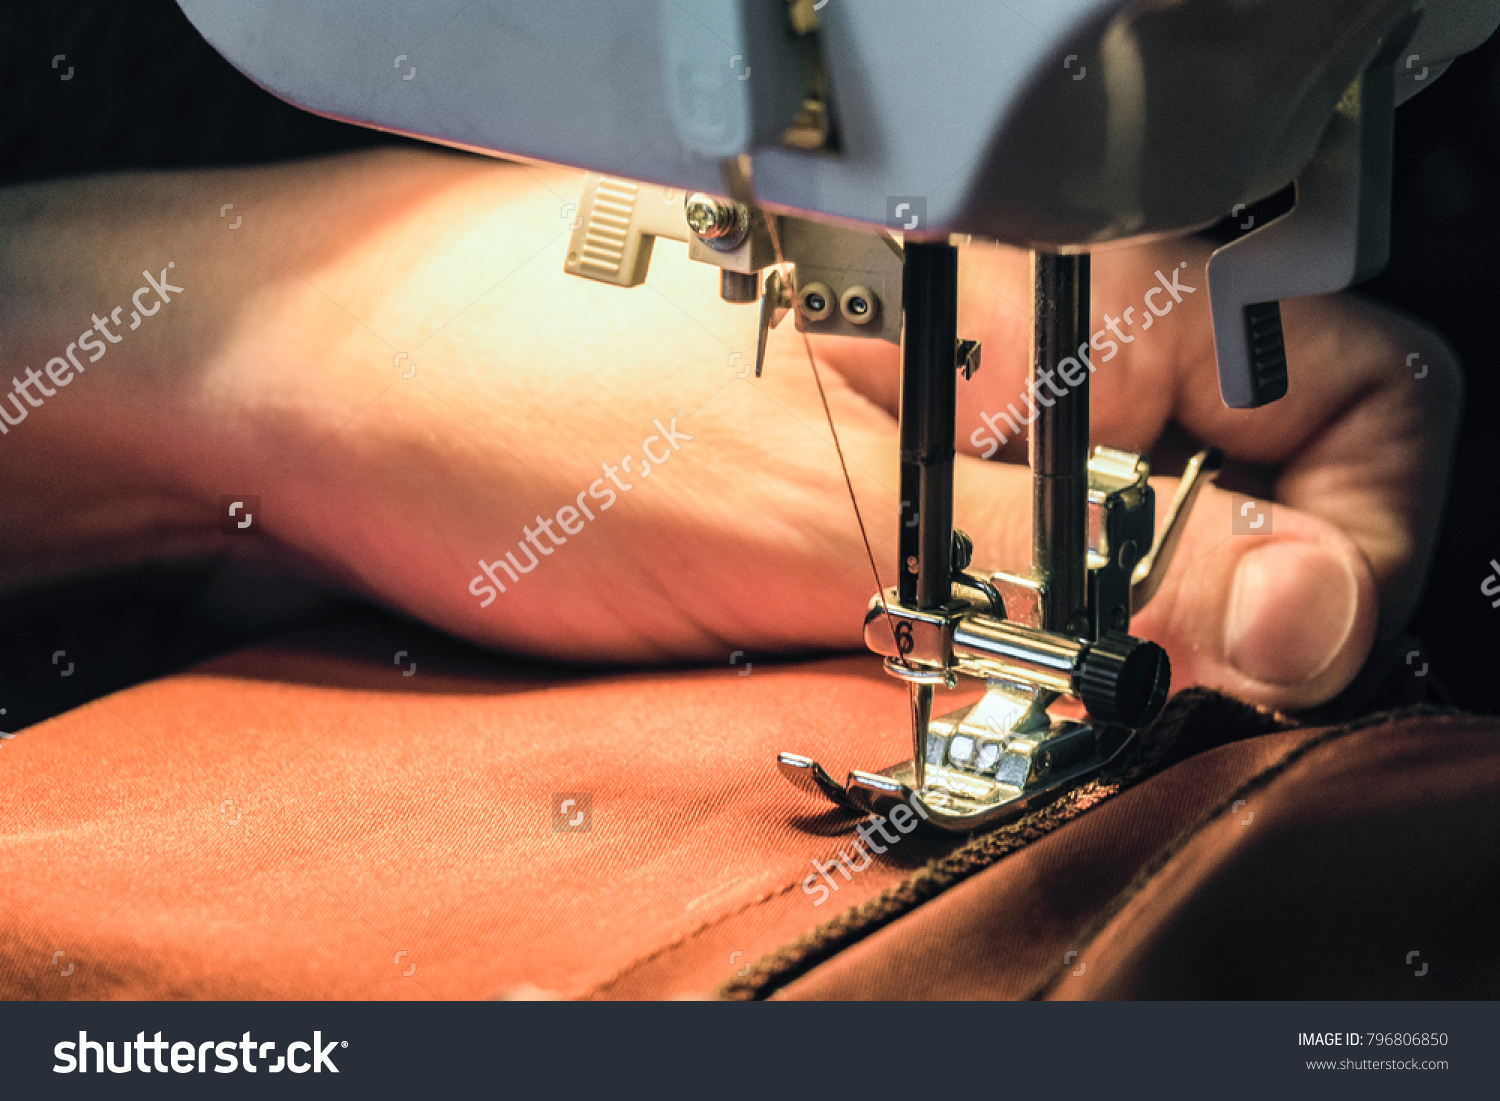 Seamstress sews clothes made of red cloth on a sewing machine. Work by the light of the built-in hardware lamp. Steel needle with looper and presser foot close-up. #796806850